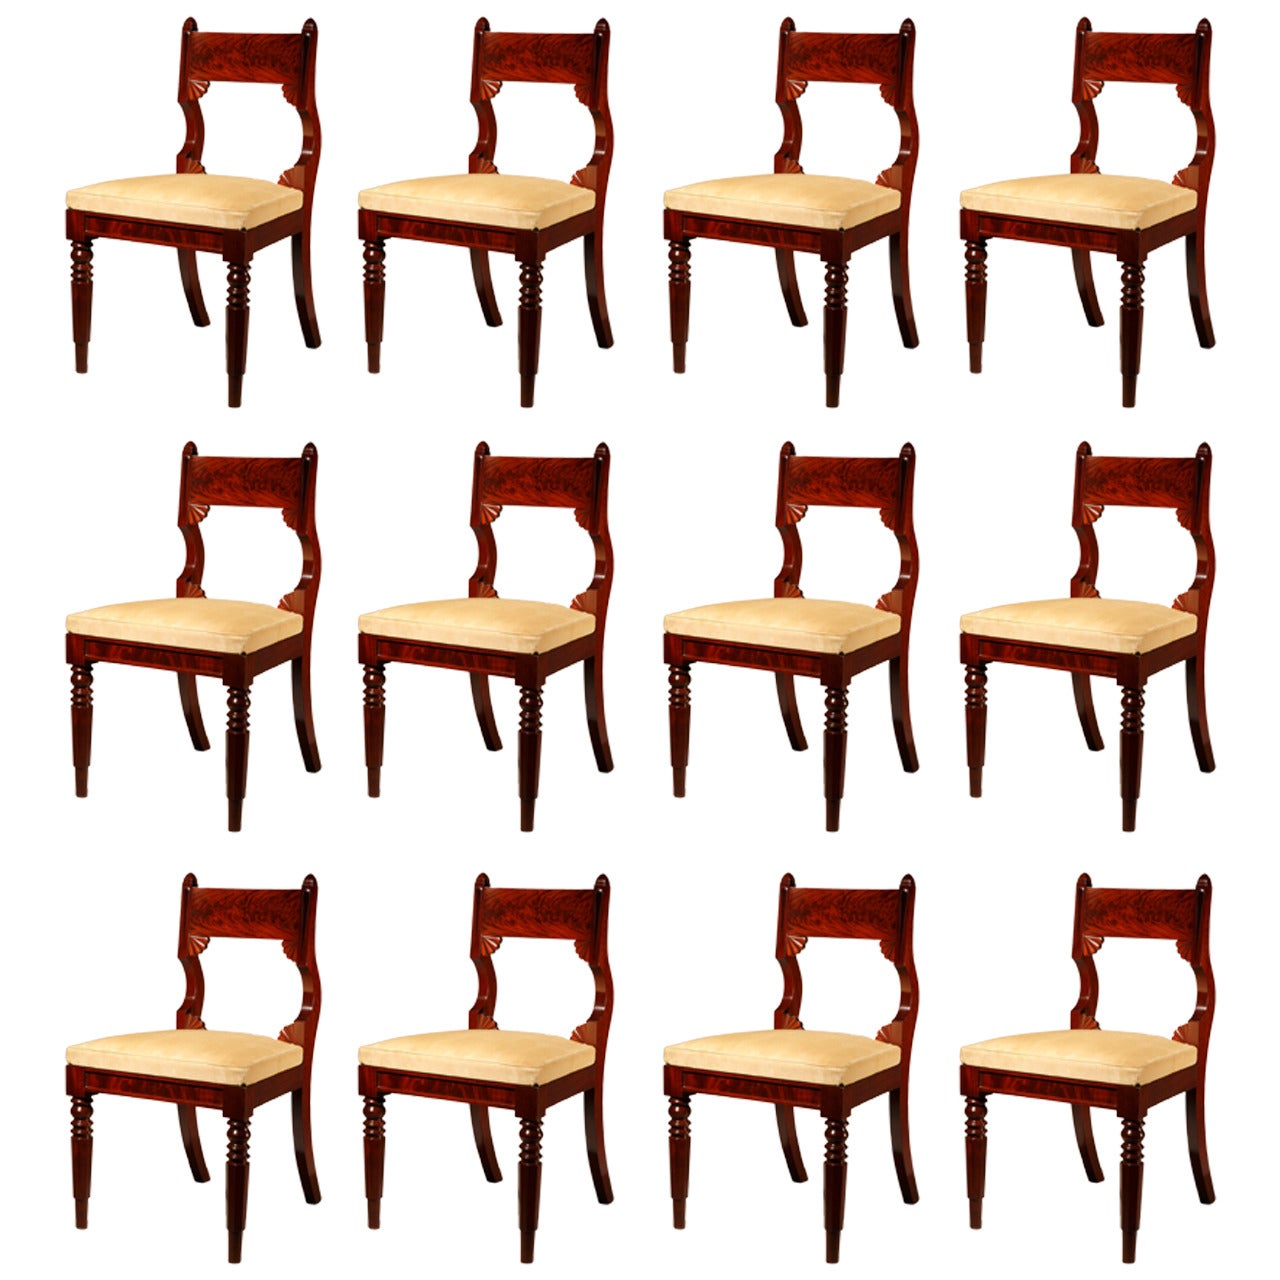 Set of 12 Mahogany Classical Dining Chairs, circa 1830 For Sale